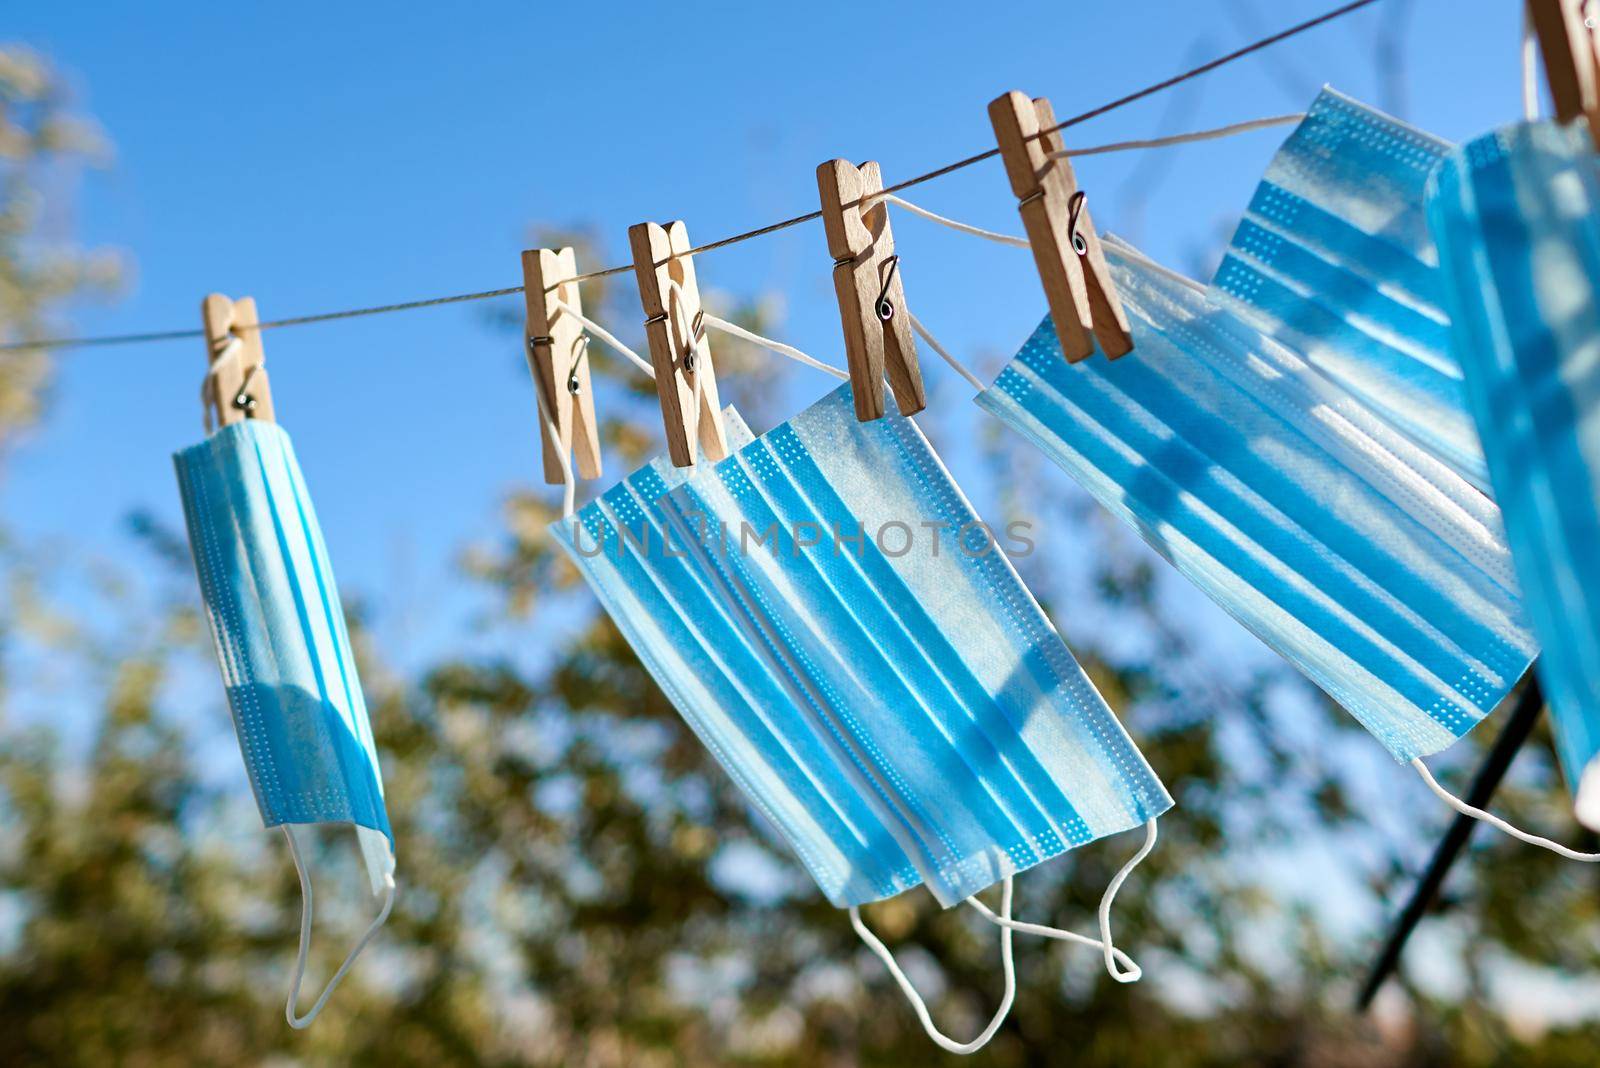 Sunlit face masks are hung to dry for disinfection. New normal concept